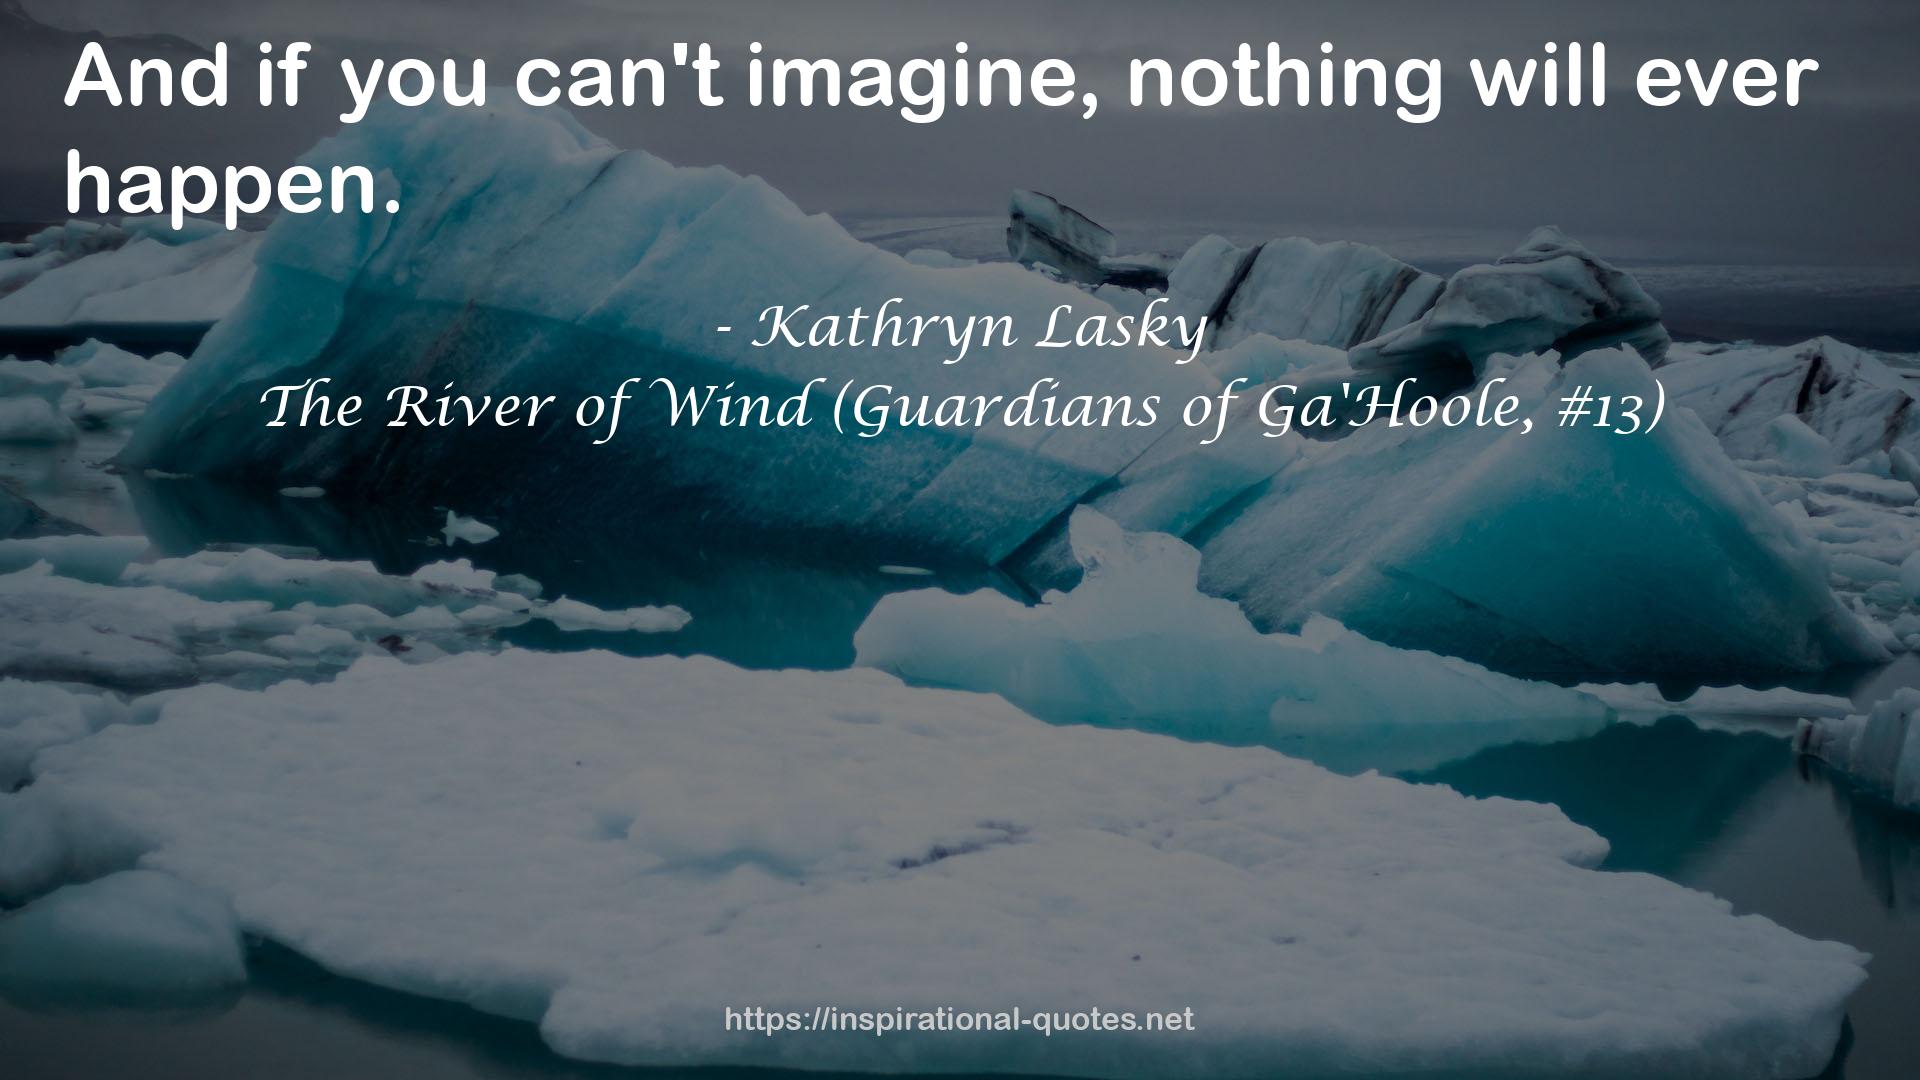 The River of Wind (Guardians of Ga'Hoole, #13) QUOTES